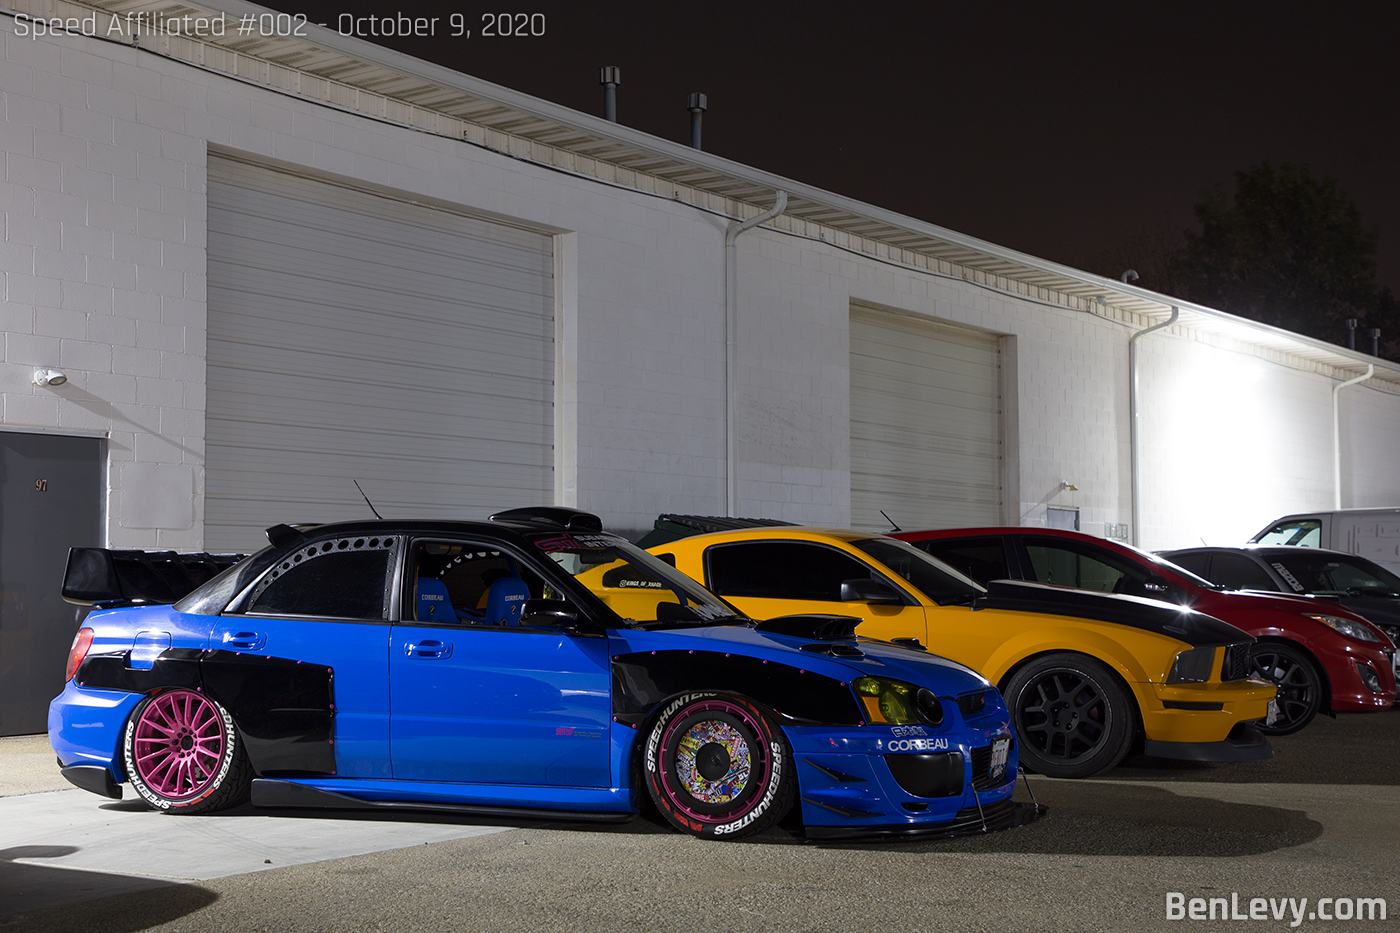 Subaru WRX and Ford Mustang at Midwest Modded